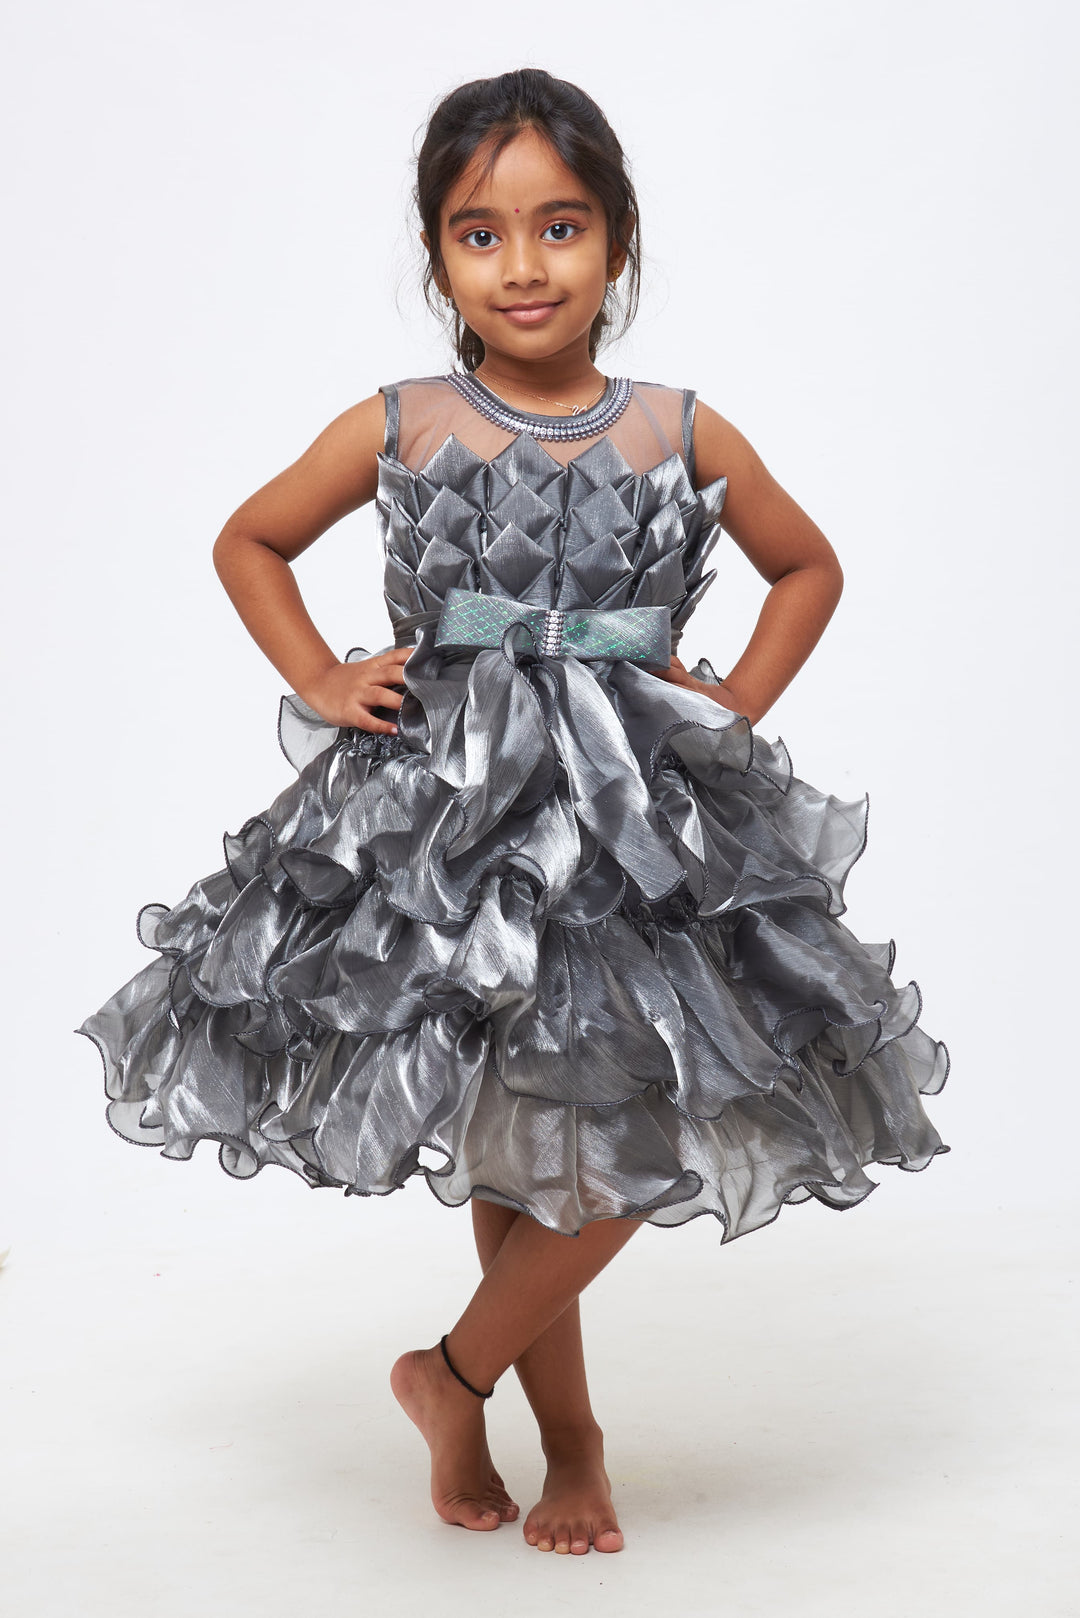 The Nesavu Girls Fancy Party Frock Enchanted Elegance: Girls Charcoal Gray Ruffled Dress with Embellished Waistband Nesavu 16 (1Y) / Gray / Satin Organza PF157A-16 Let Her Shine Bright | Glamorous Party Frocks for Girls | The Nesavu.